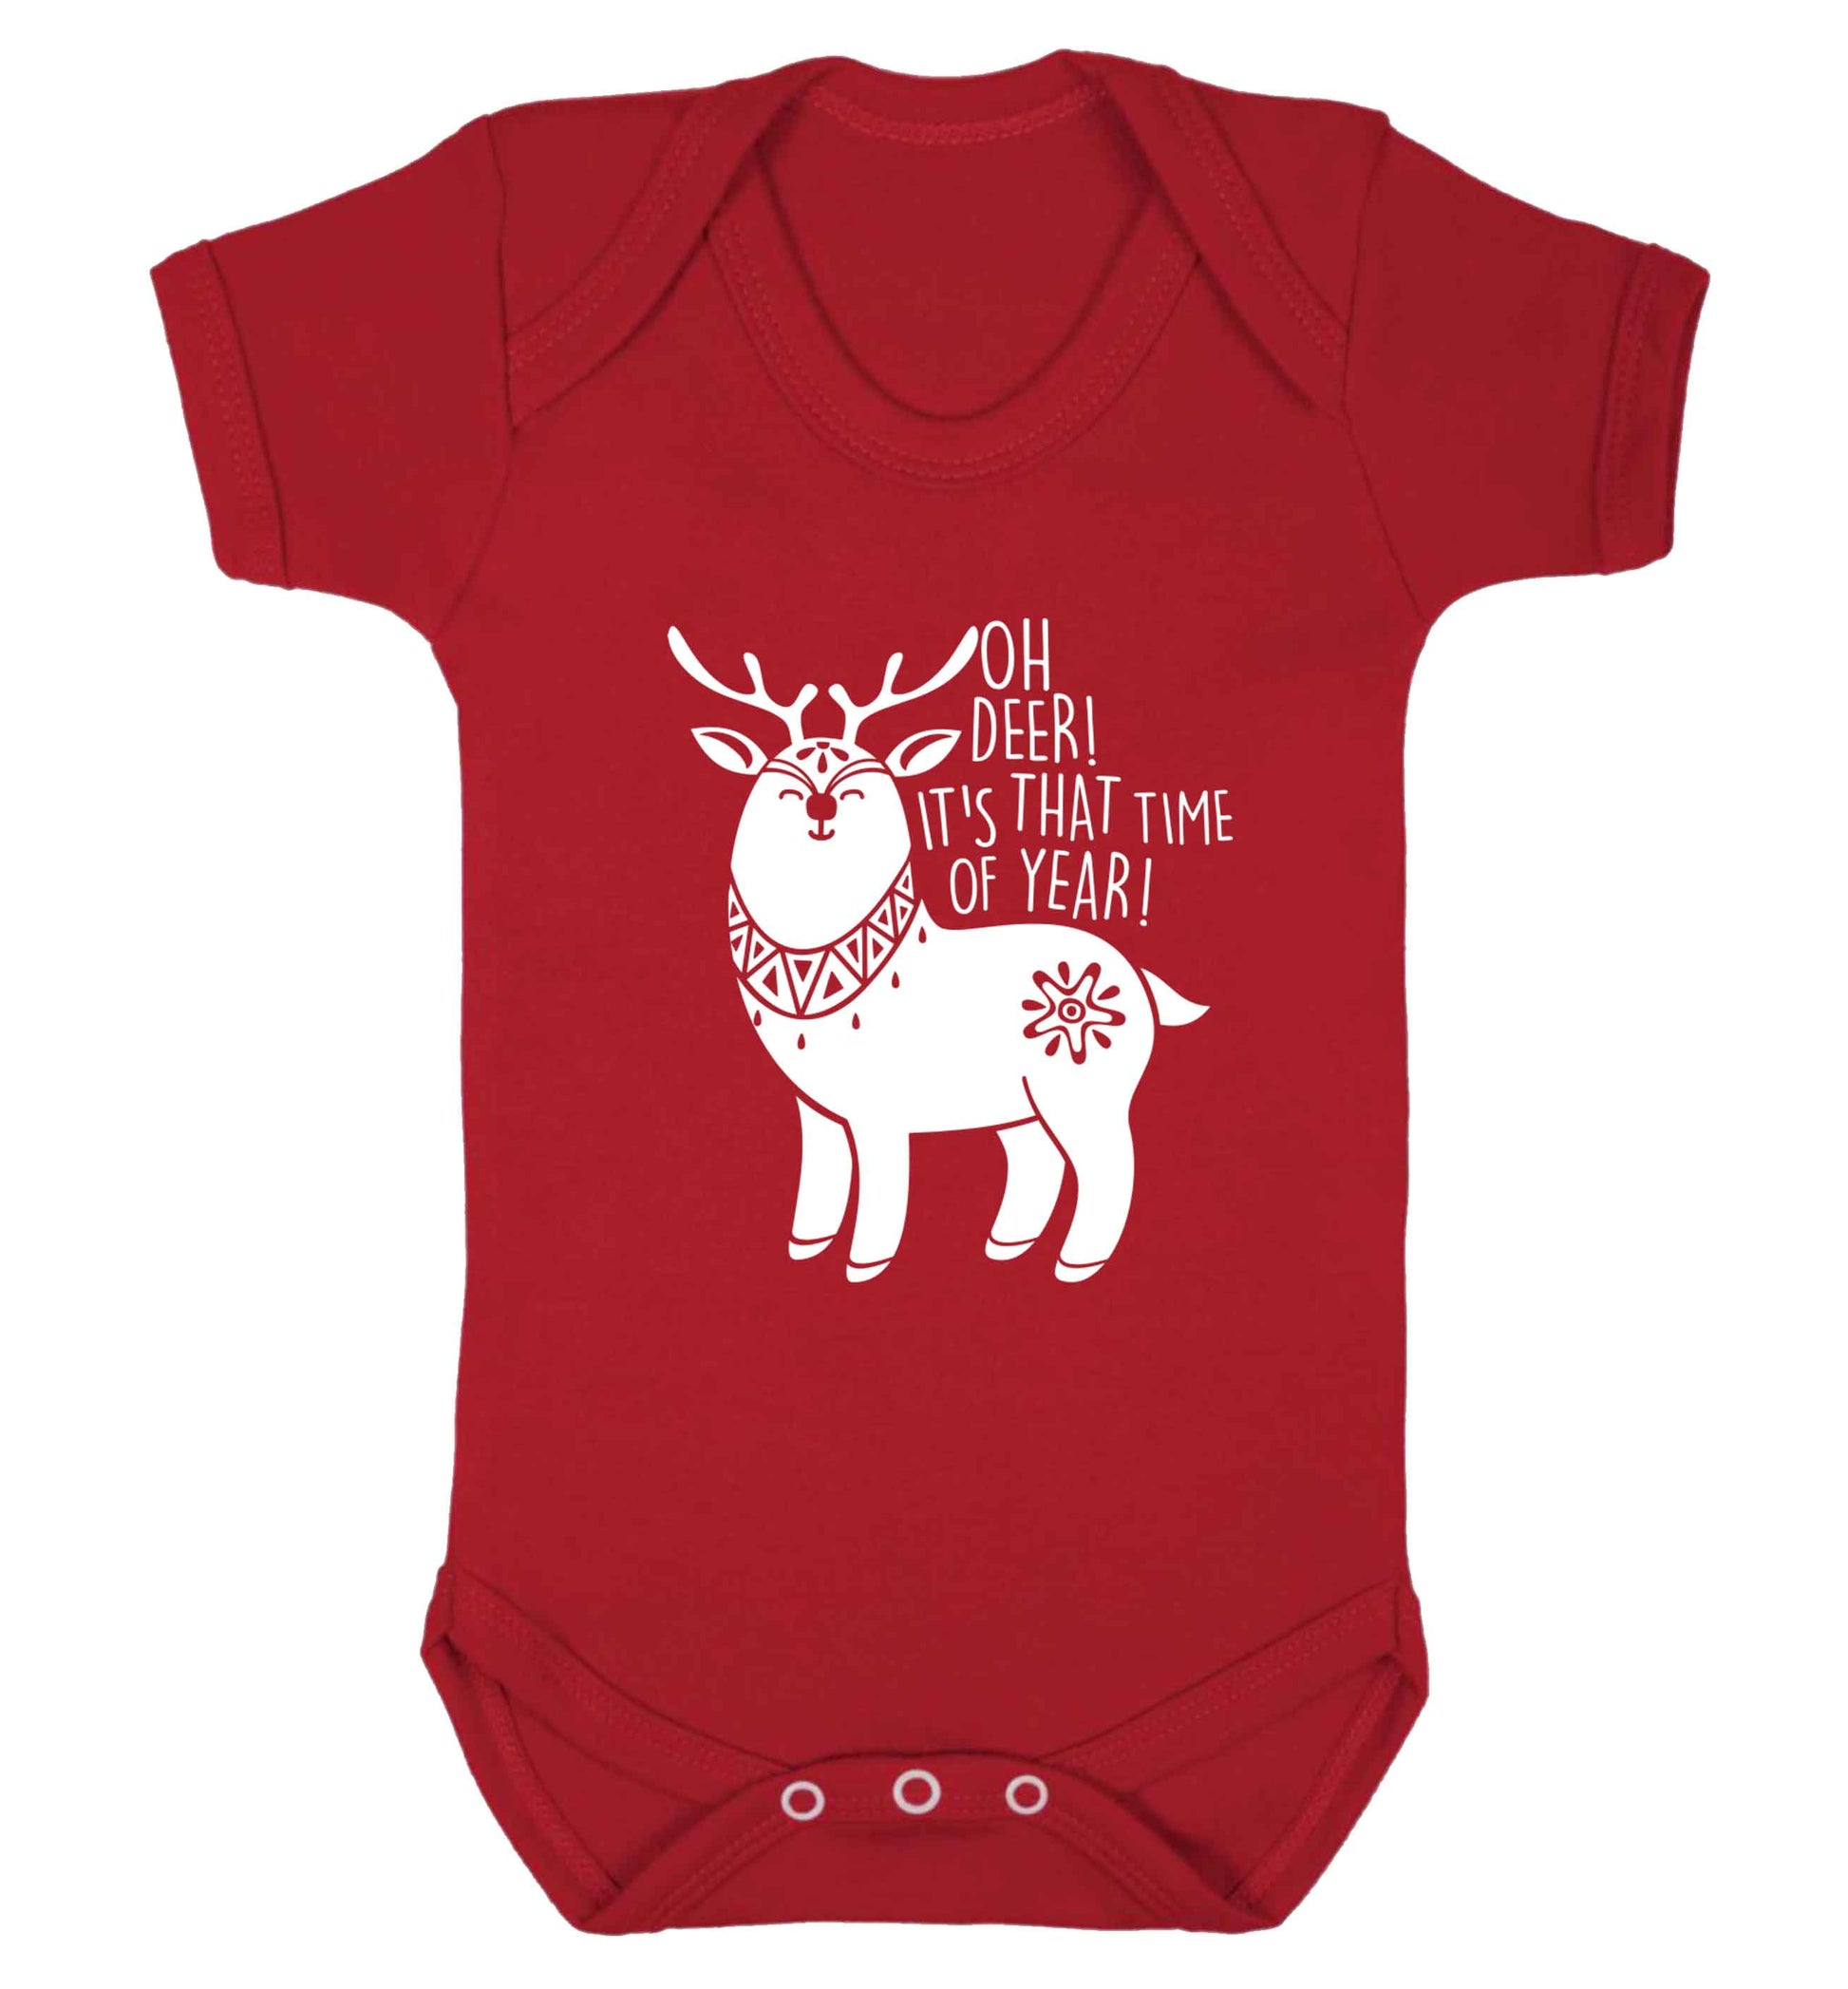 Oh dear it's that time of year Baby Vest red 18-24 months